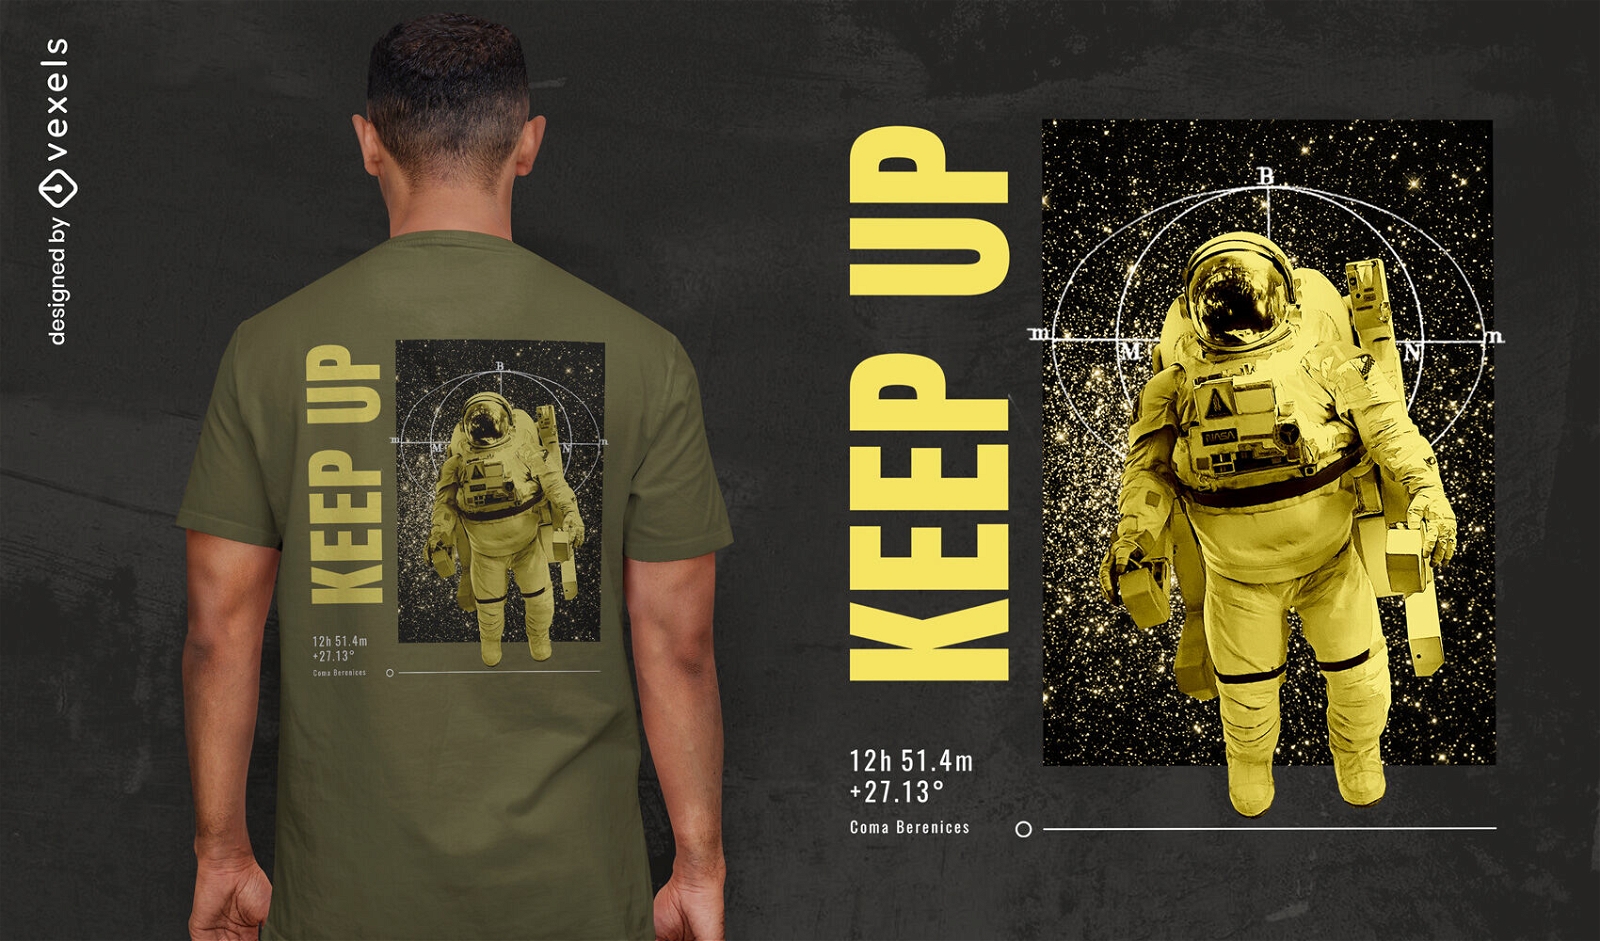 Astronaut floating in space t-shirt design